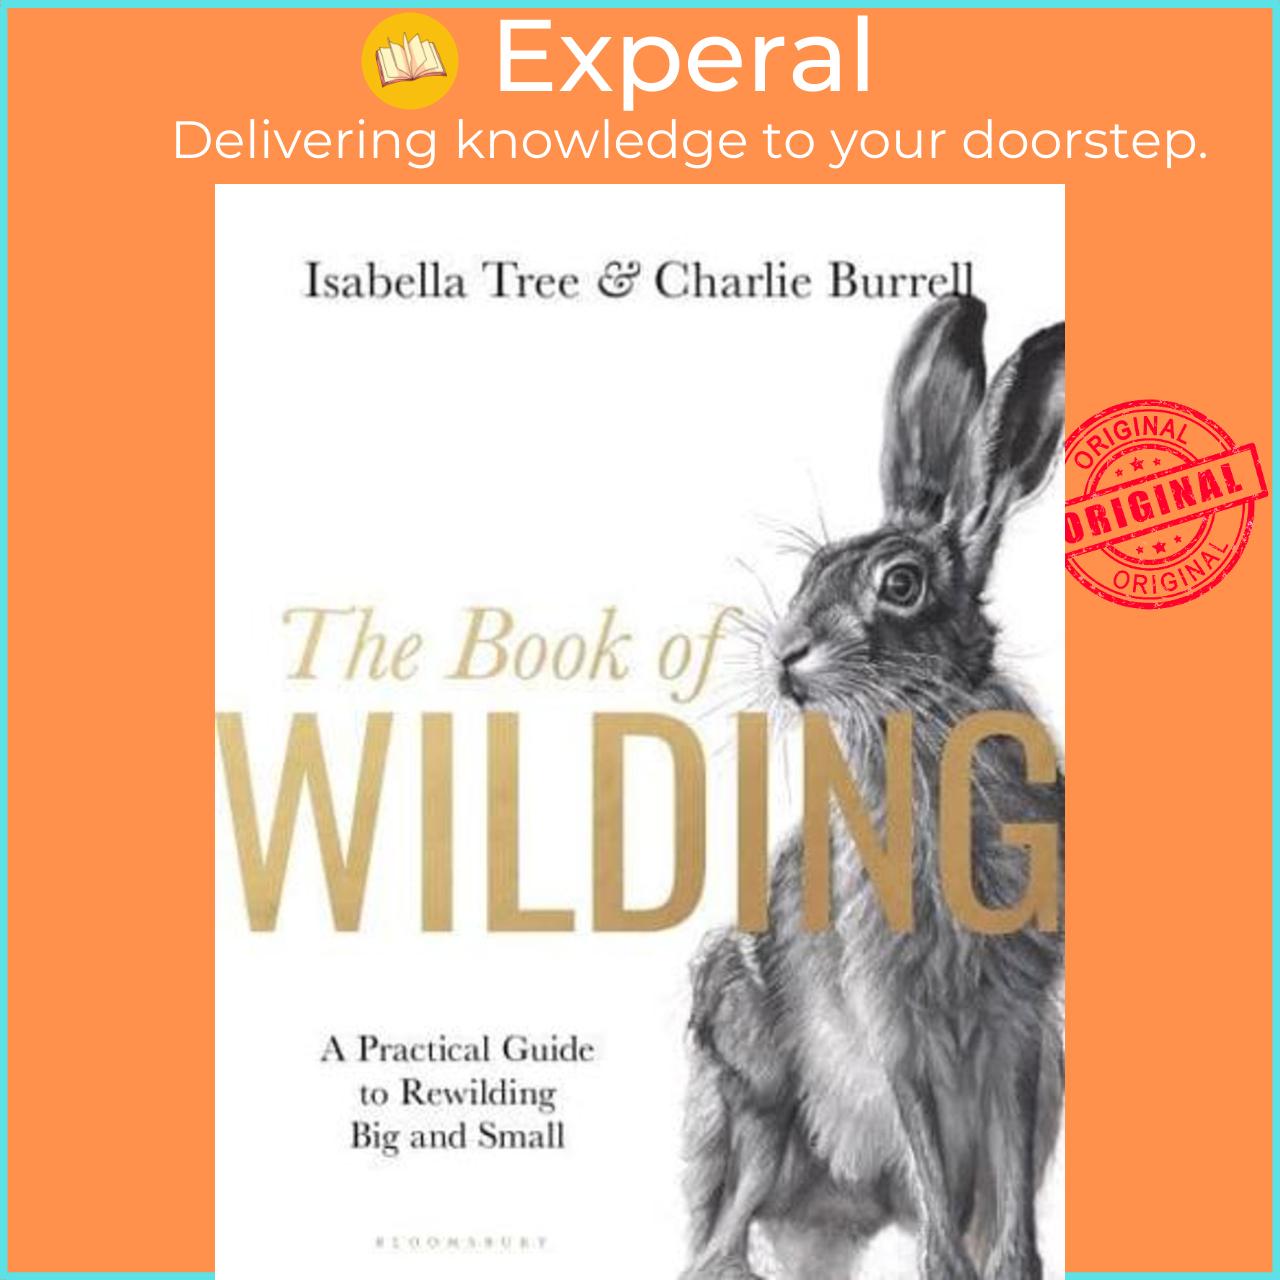 Sách - The Book of Wilding A Practical Guide to Rewilding, Big and Small by Isabella Tree (UK edition, Hardback)